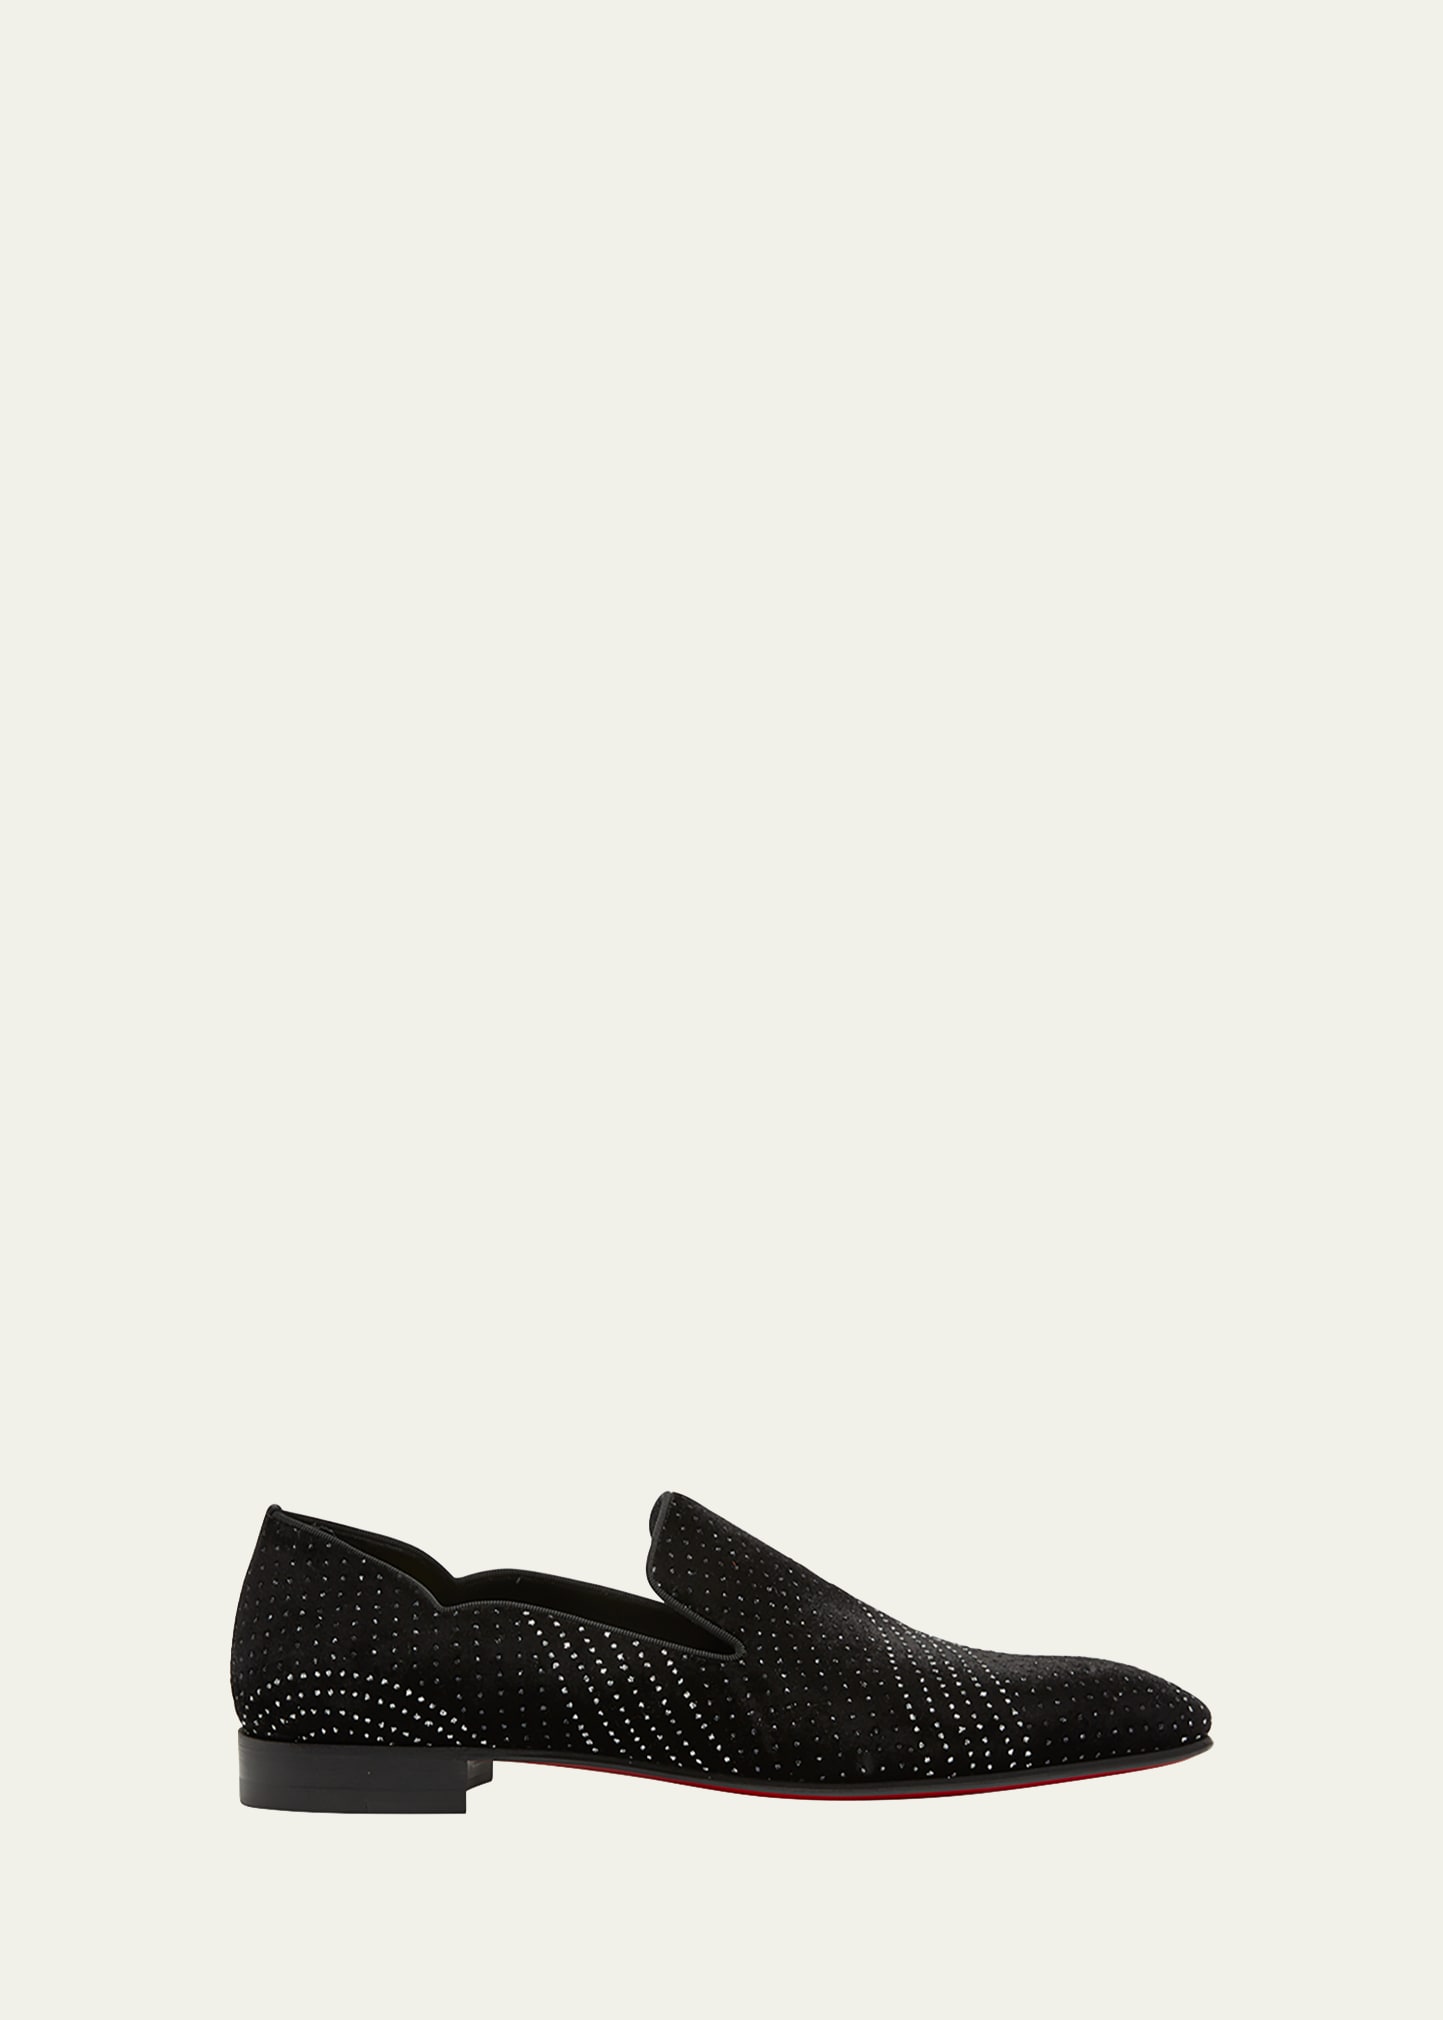 Christian Louboutin Dandy Chick Loafer in Black/Silver